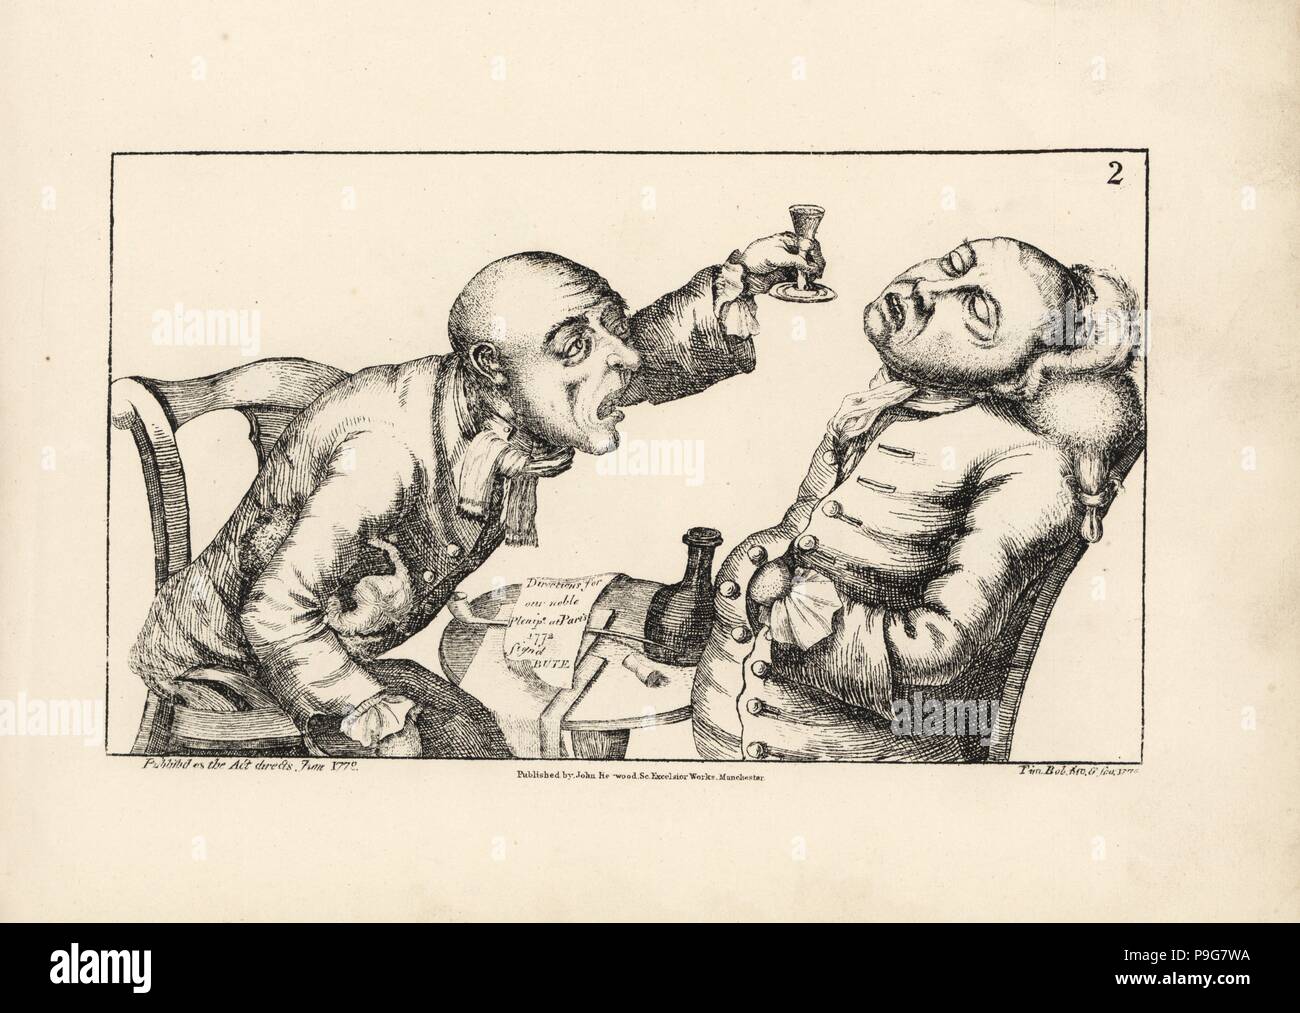 Two drunks at a table, one raising a glass of wine to his inebriated, sleeping companion. On the table a letter from Lord Bute, dated 1772 (Bute was accused of accepting bribes from the French). Copperplate engraving by Thomas Sanders after a satirical illustration by Timothy Bobbin (John Collier) from Human Passions Delineated, John Haywood, Manchester, 1773. Stock Photo